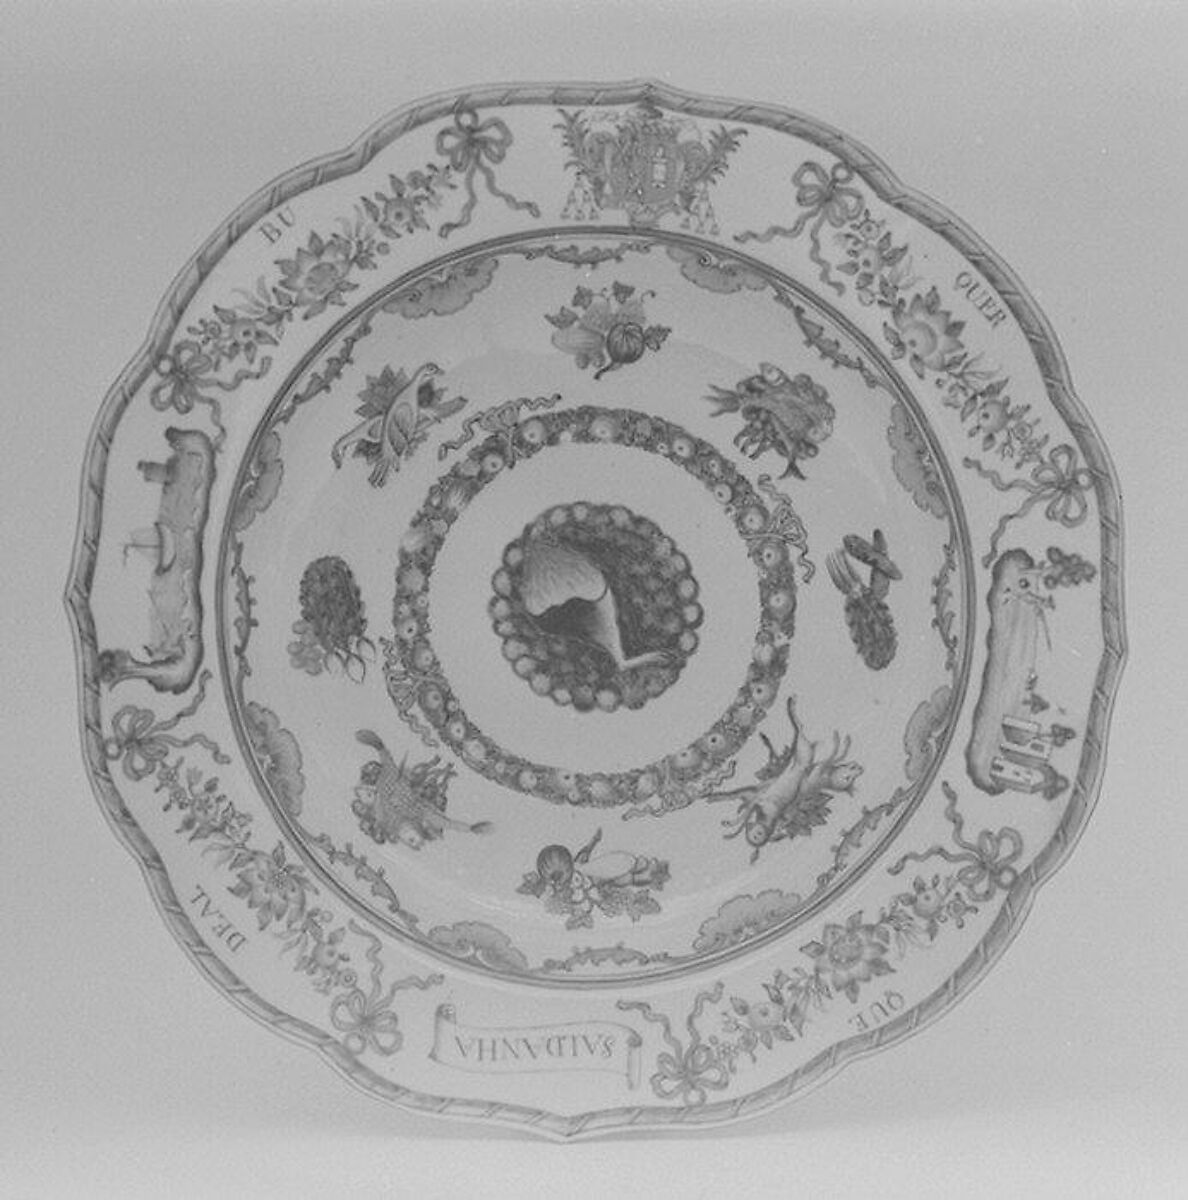 Soup plate (part of a service), Hard-paste porcelain, Chinese, for Portuguese market 